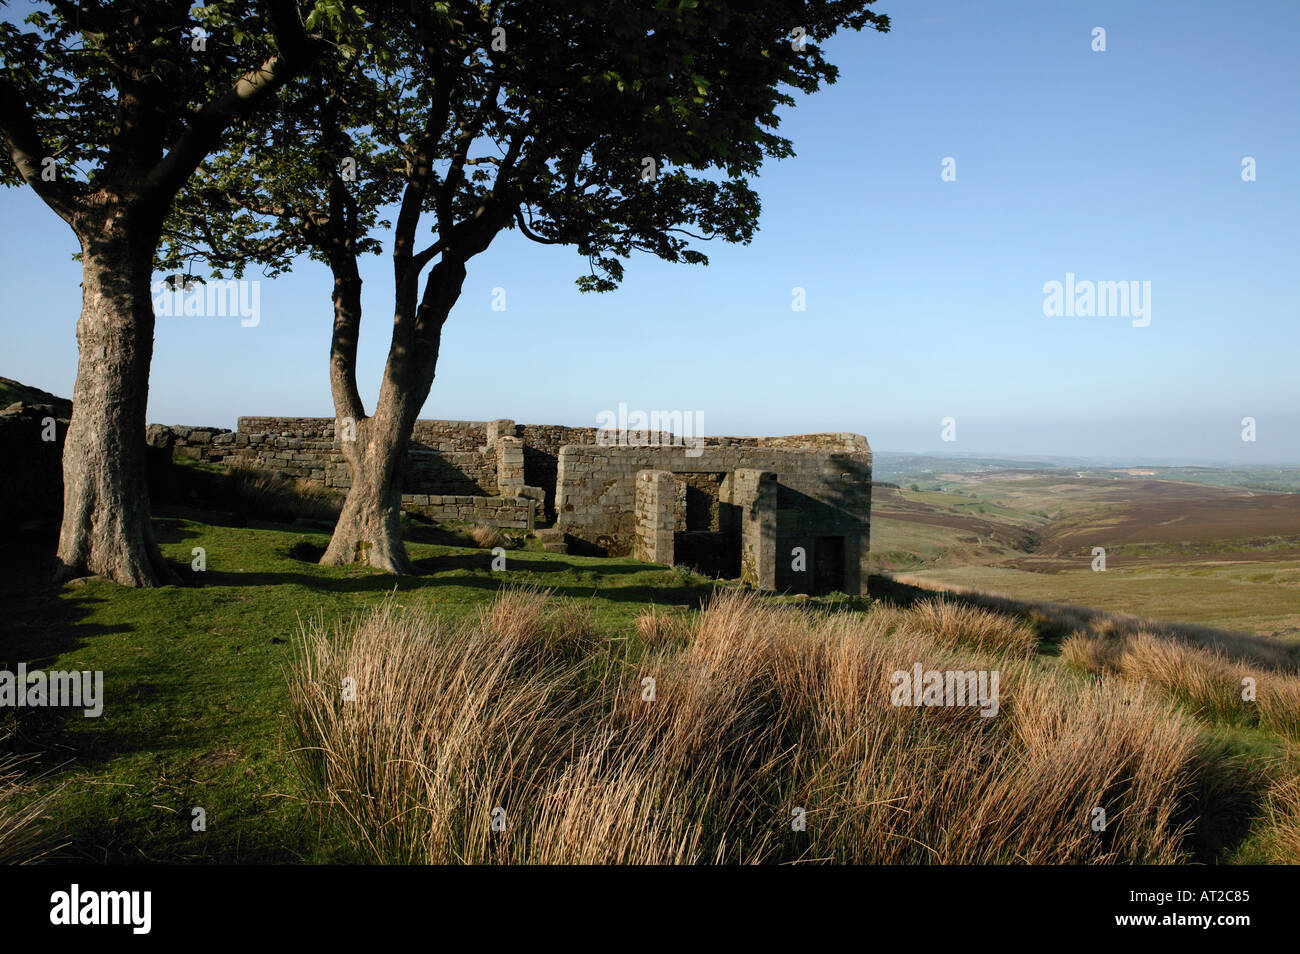 RUINE DER TOP WITHENS WITHINS FARM WUTHERING HEIGHTS STANBURY MOOR BRONTE LAND YORKSHIRE ENGLAND Stockfoto